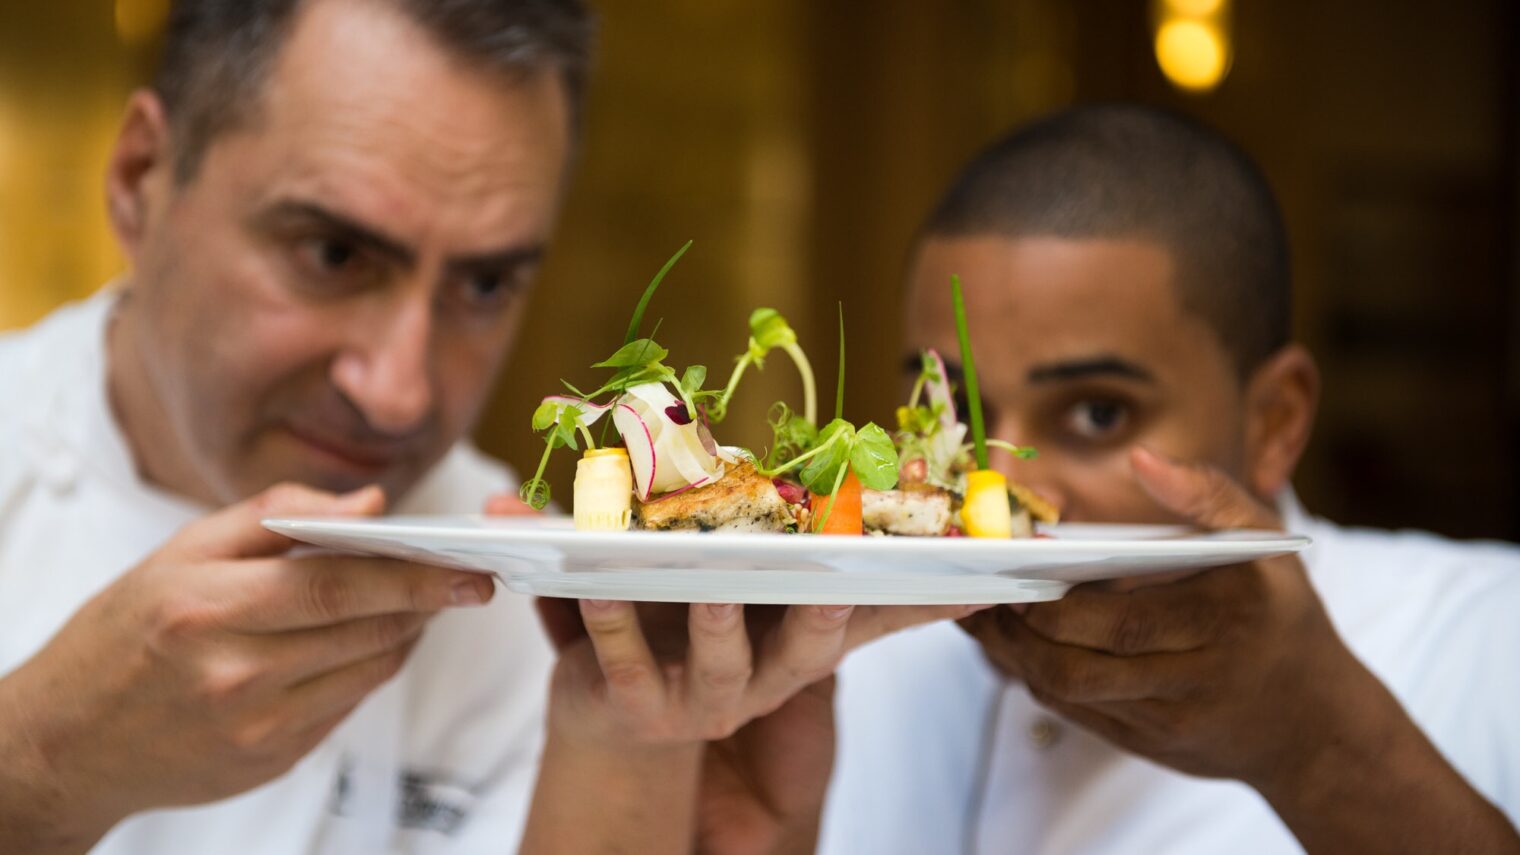 Chefs Itzik Barak (Waldorf Jerusalem) and Joseph Johnson (The Cecil, New York) used Israeli culinary inspirations to create this Seven Species dish for the Taste of Waldorf Astoria contest. Photo by Sarka Babicka